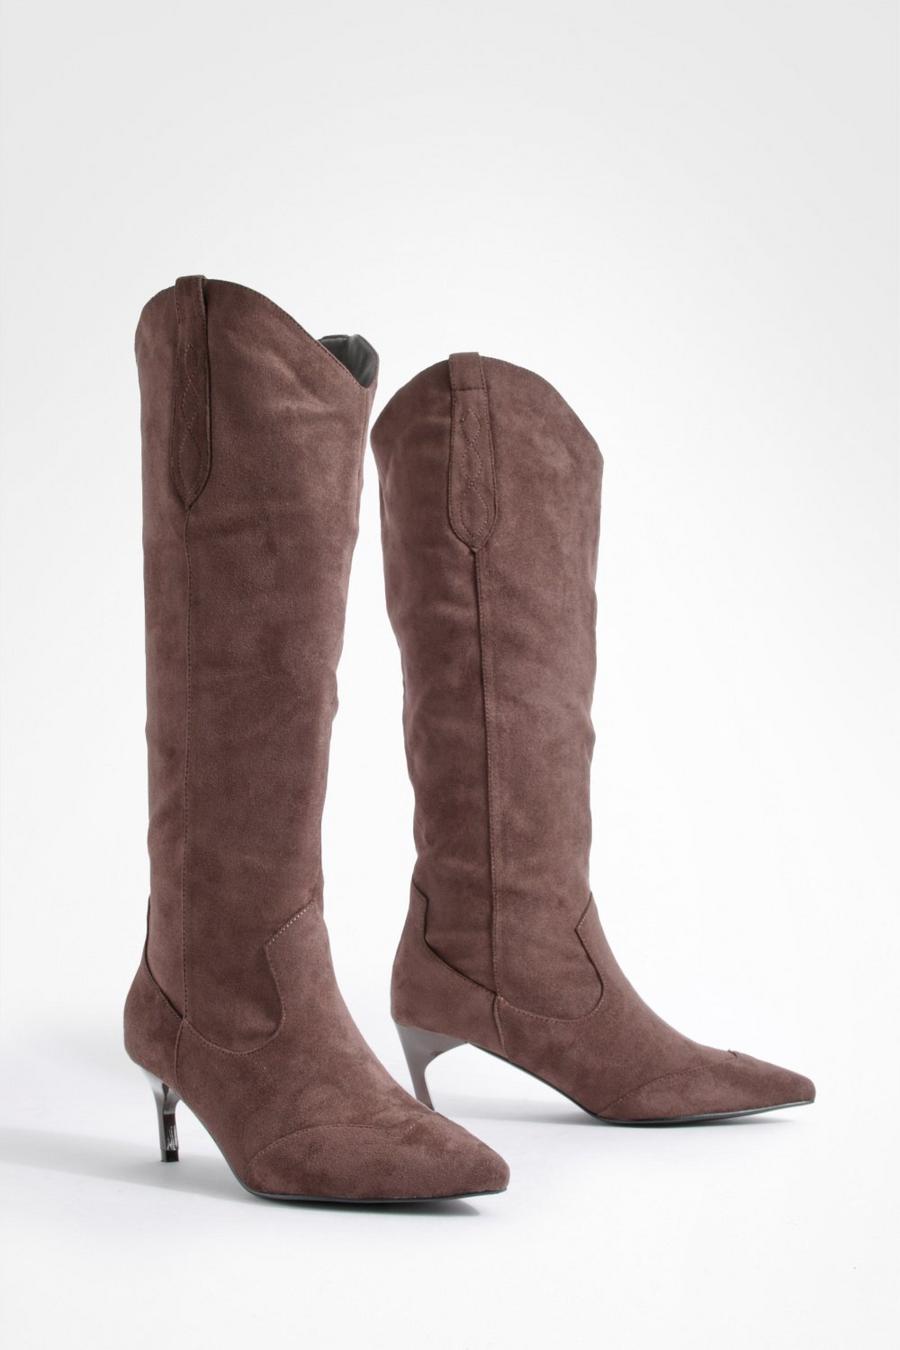 Chocolate Western Detail Low Knee High Boots image number 1